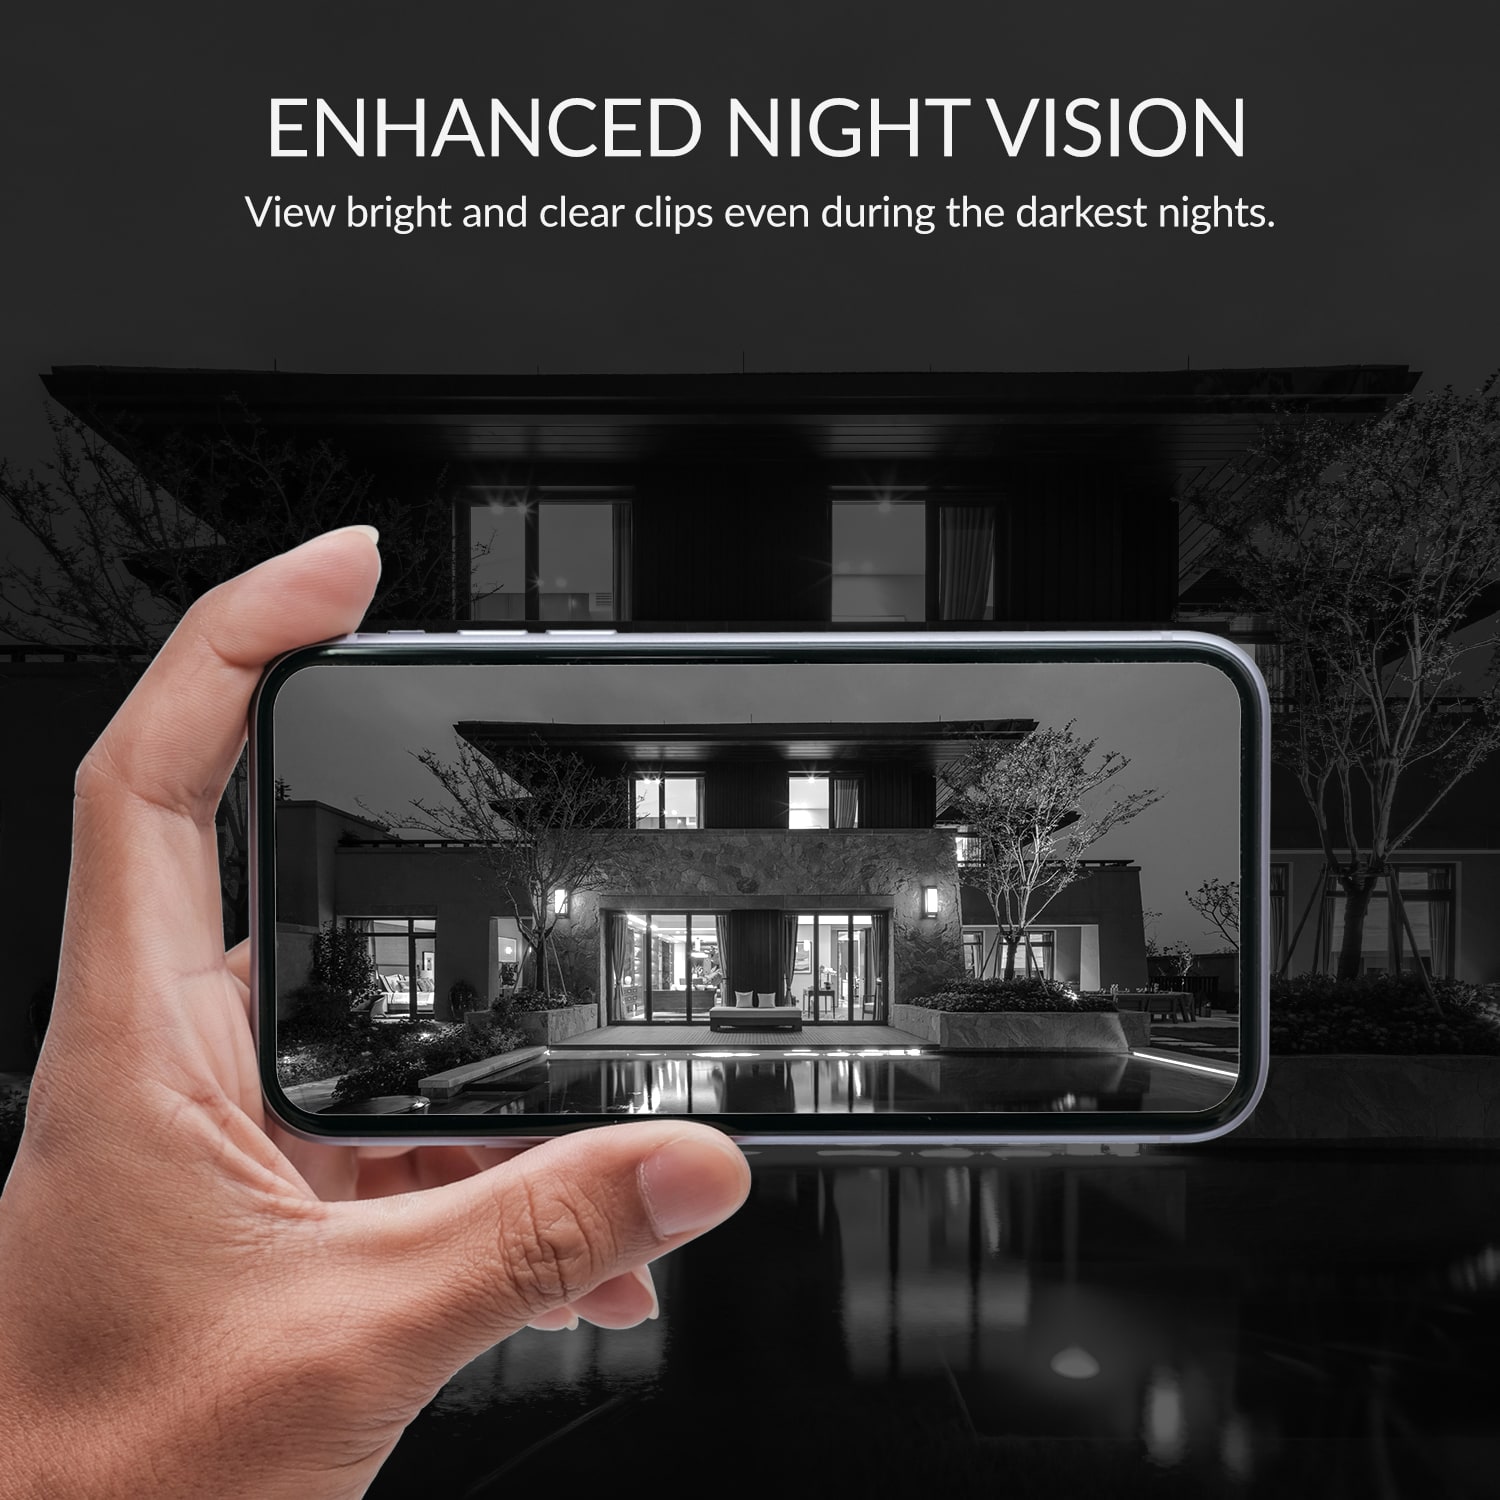 Enhanced Night Vision - View bright and clear clips even during the darkest nights